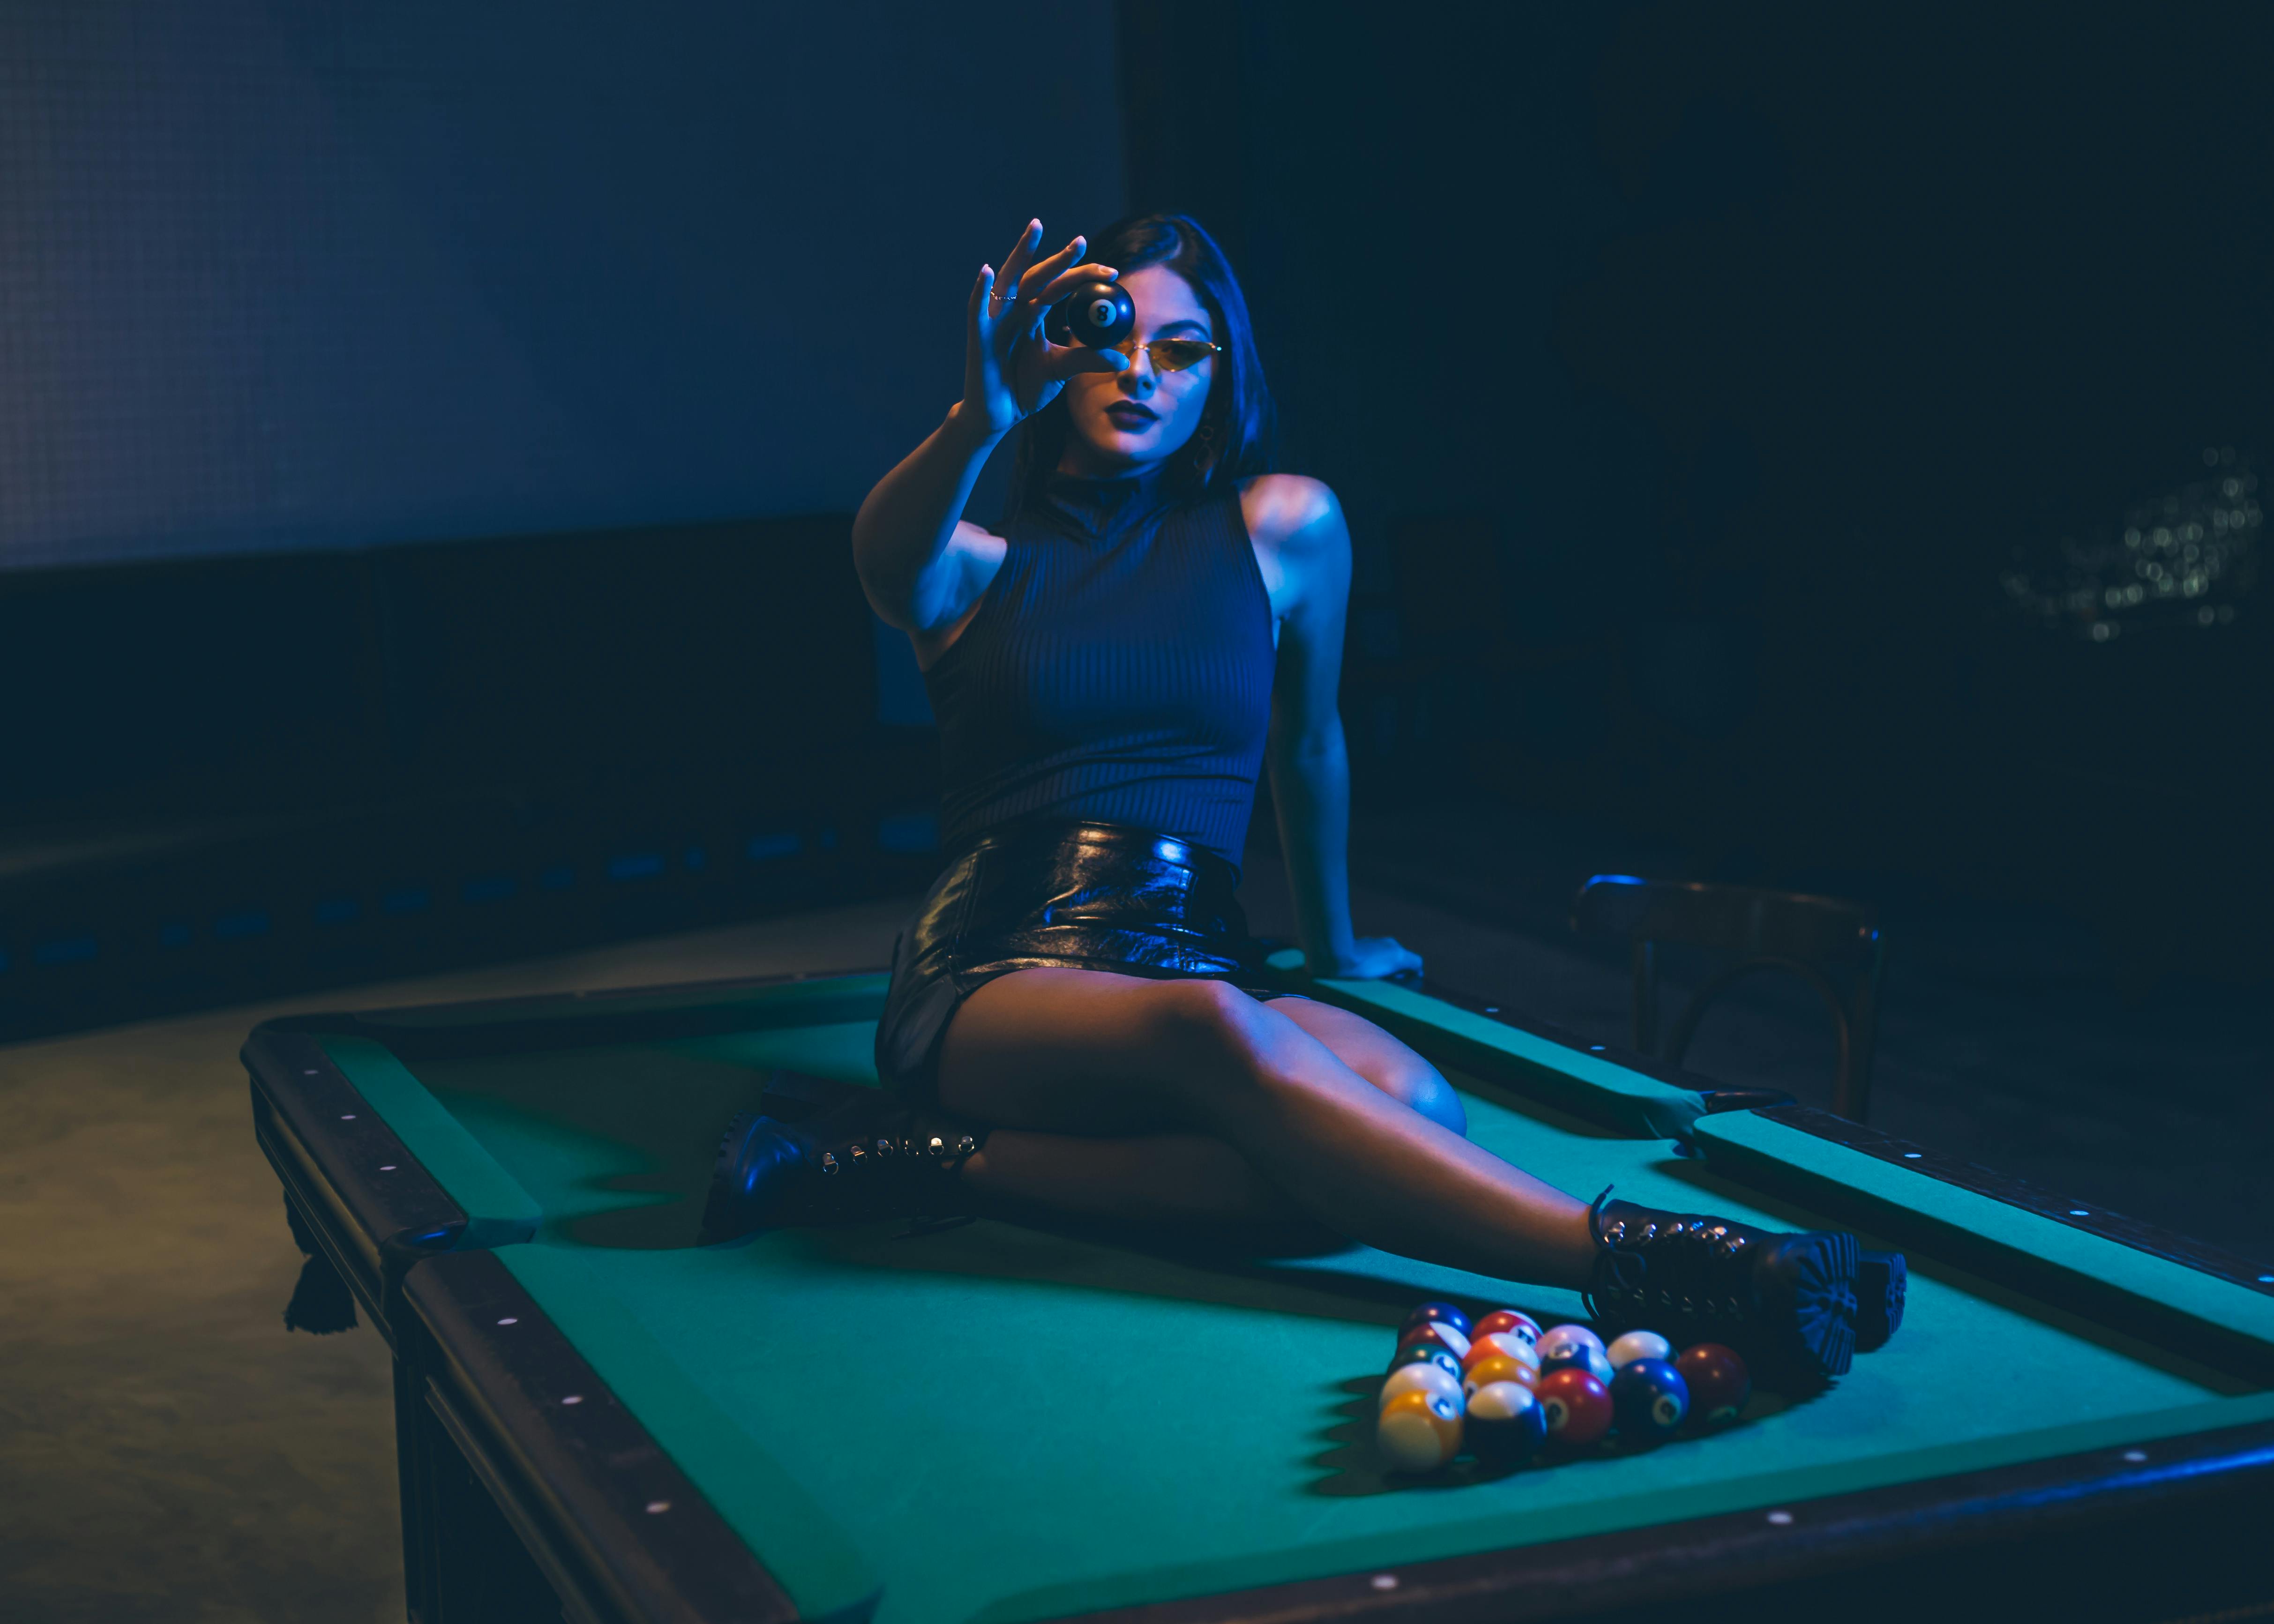 On the pool table.